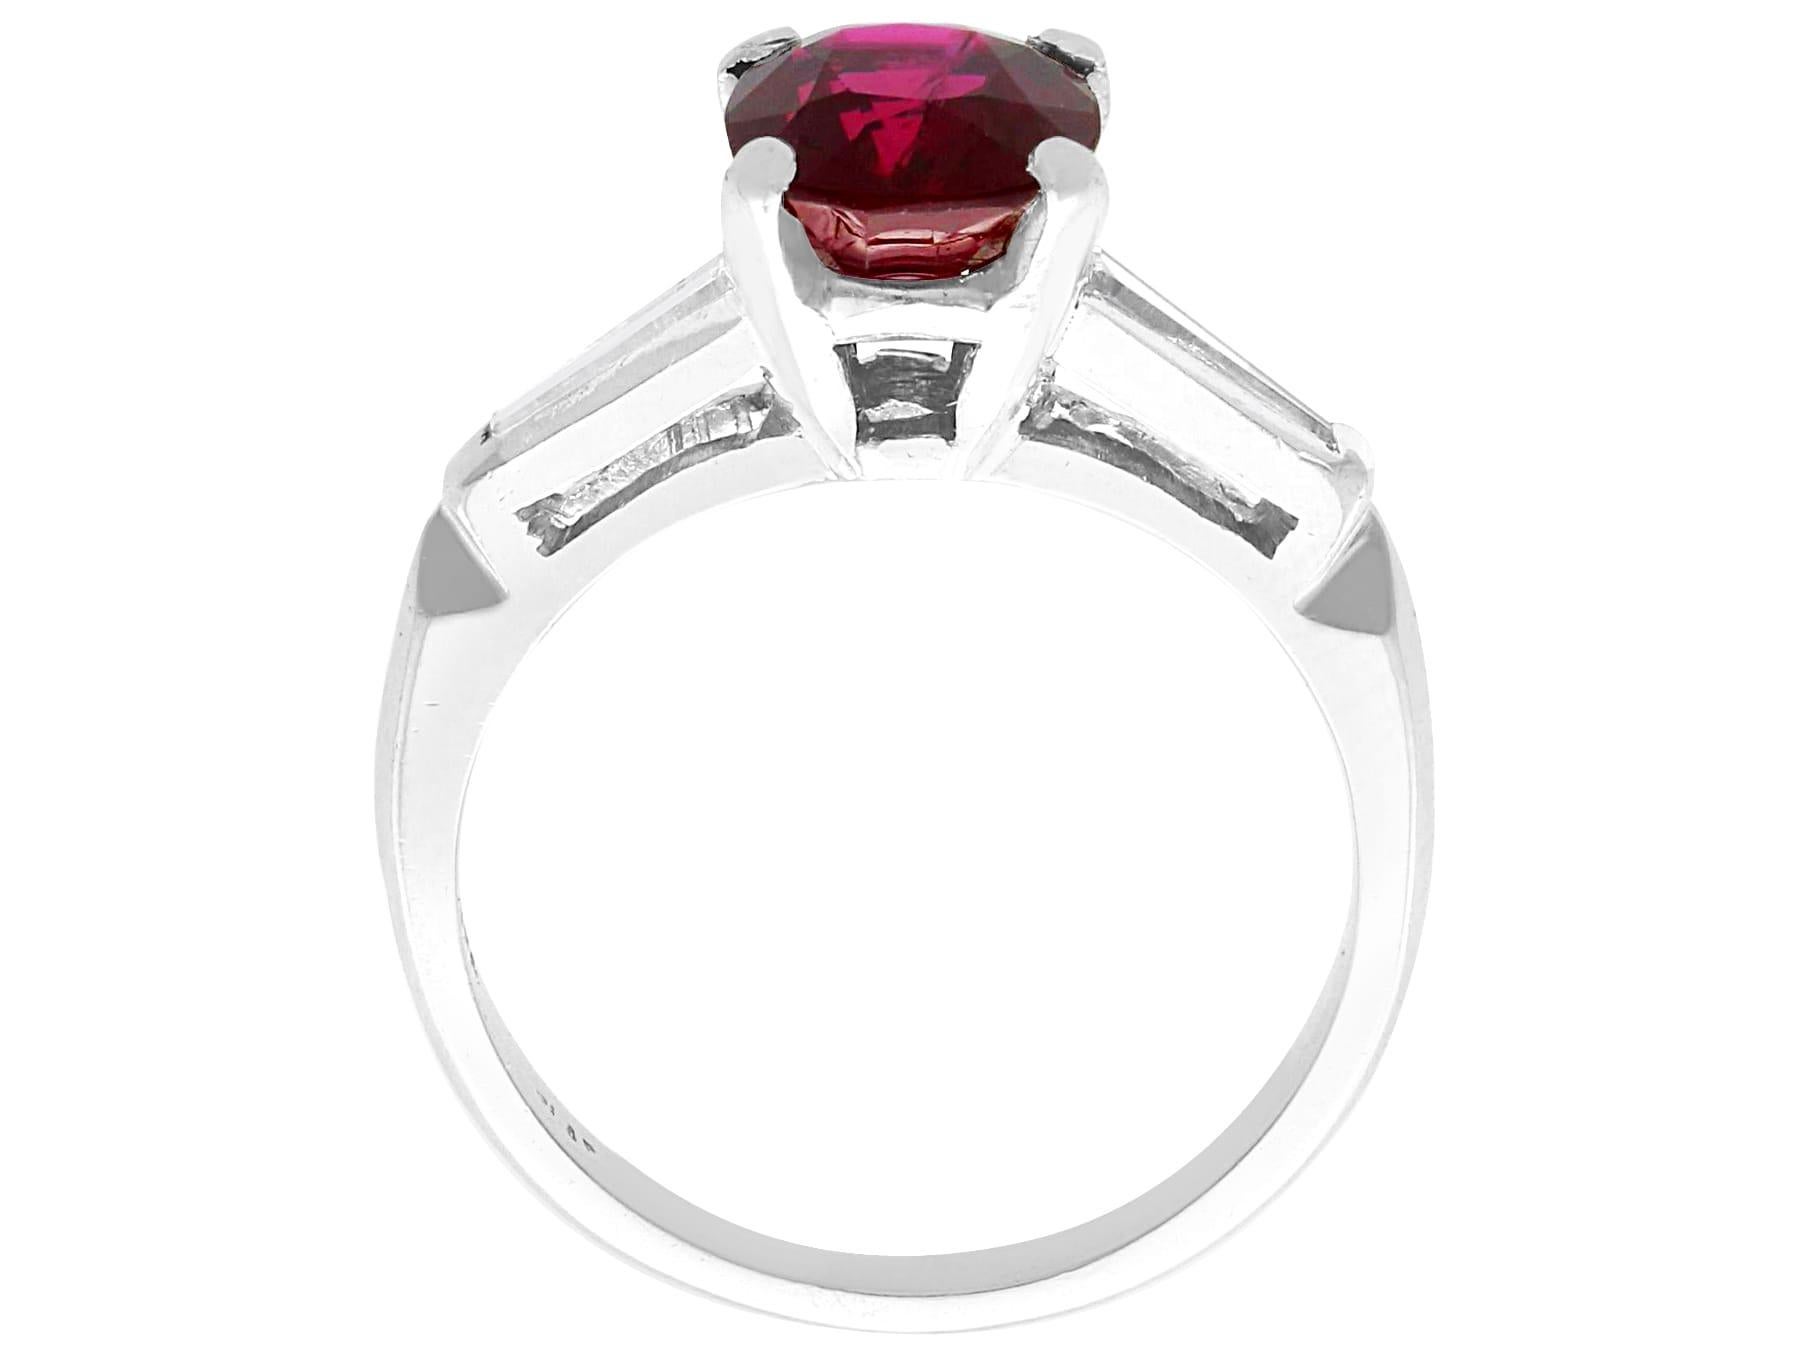 Vintage 2.73 Carat Ruby and Diamond Platinum Ring In Excellent Condition For Sale In Jesmond, Newcastle Upon Tyne